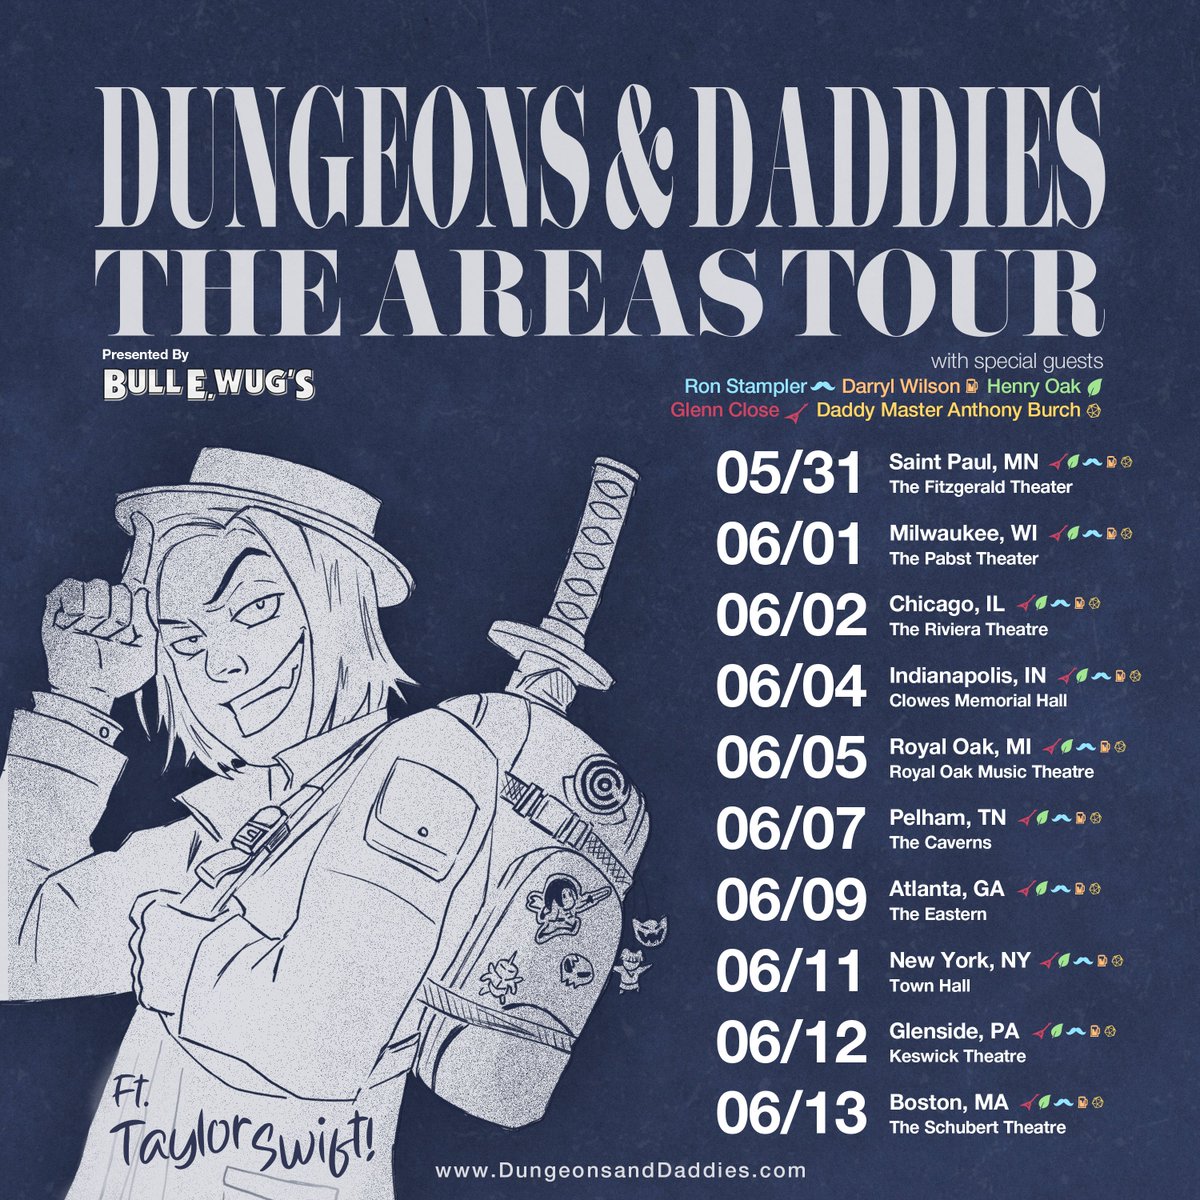 The daddies are hitting the road again: The Areas Tour is coming to the Midwest & East Coast this summer. Get your tickets today to see the season 1 dads we all know & love! linktr.ee/dungeonsanddad… For our friends across the pond, don't fret! We're planning a Europe tour soon™️